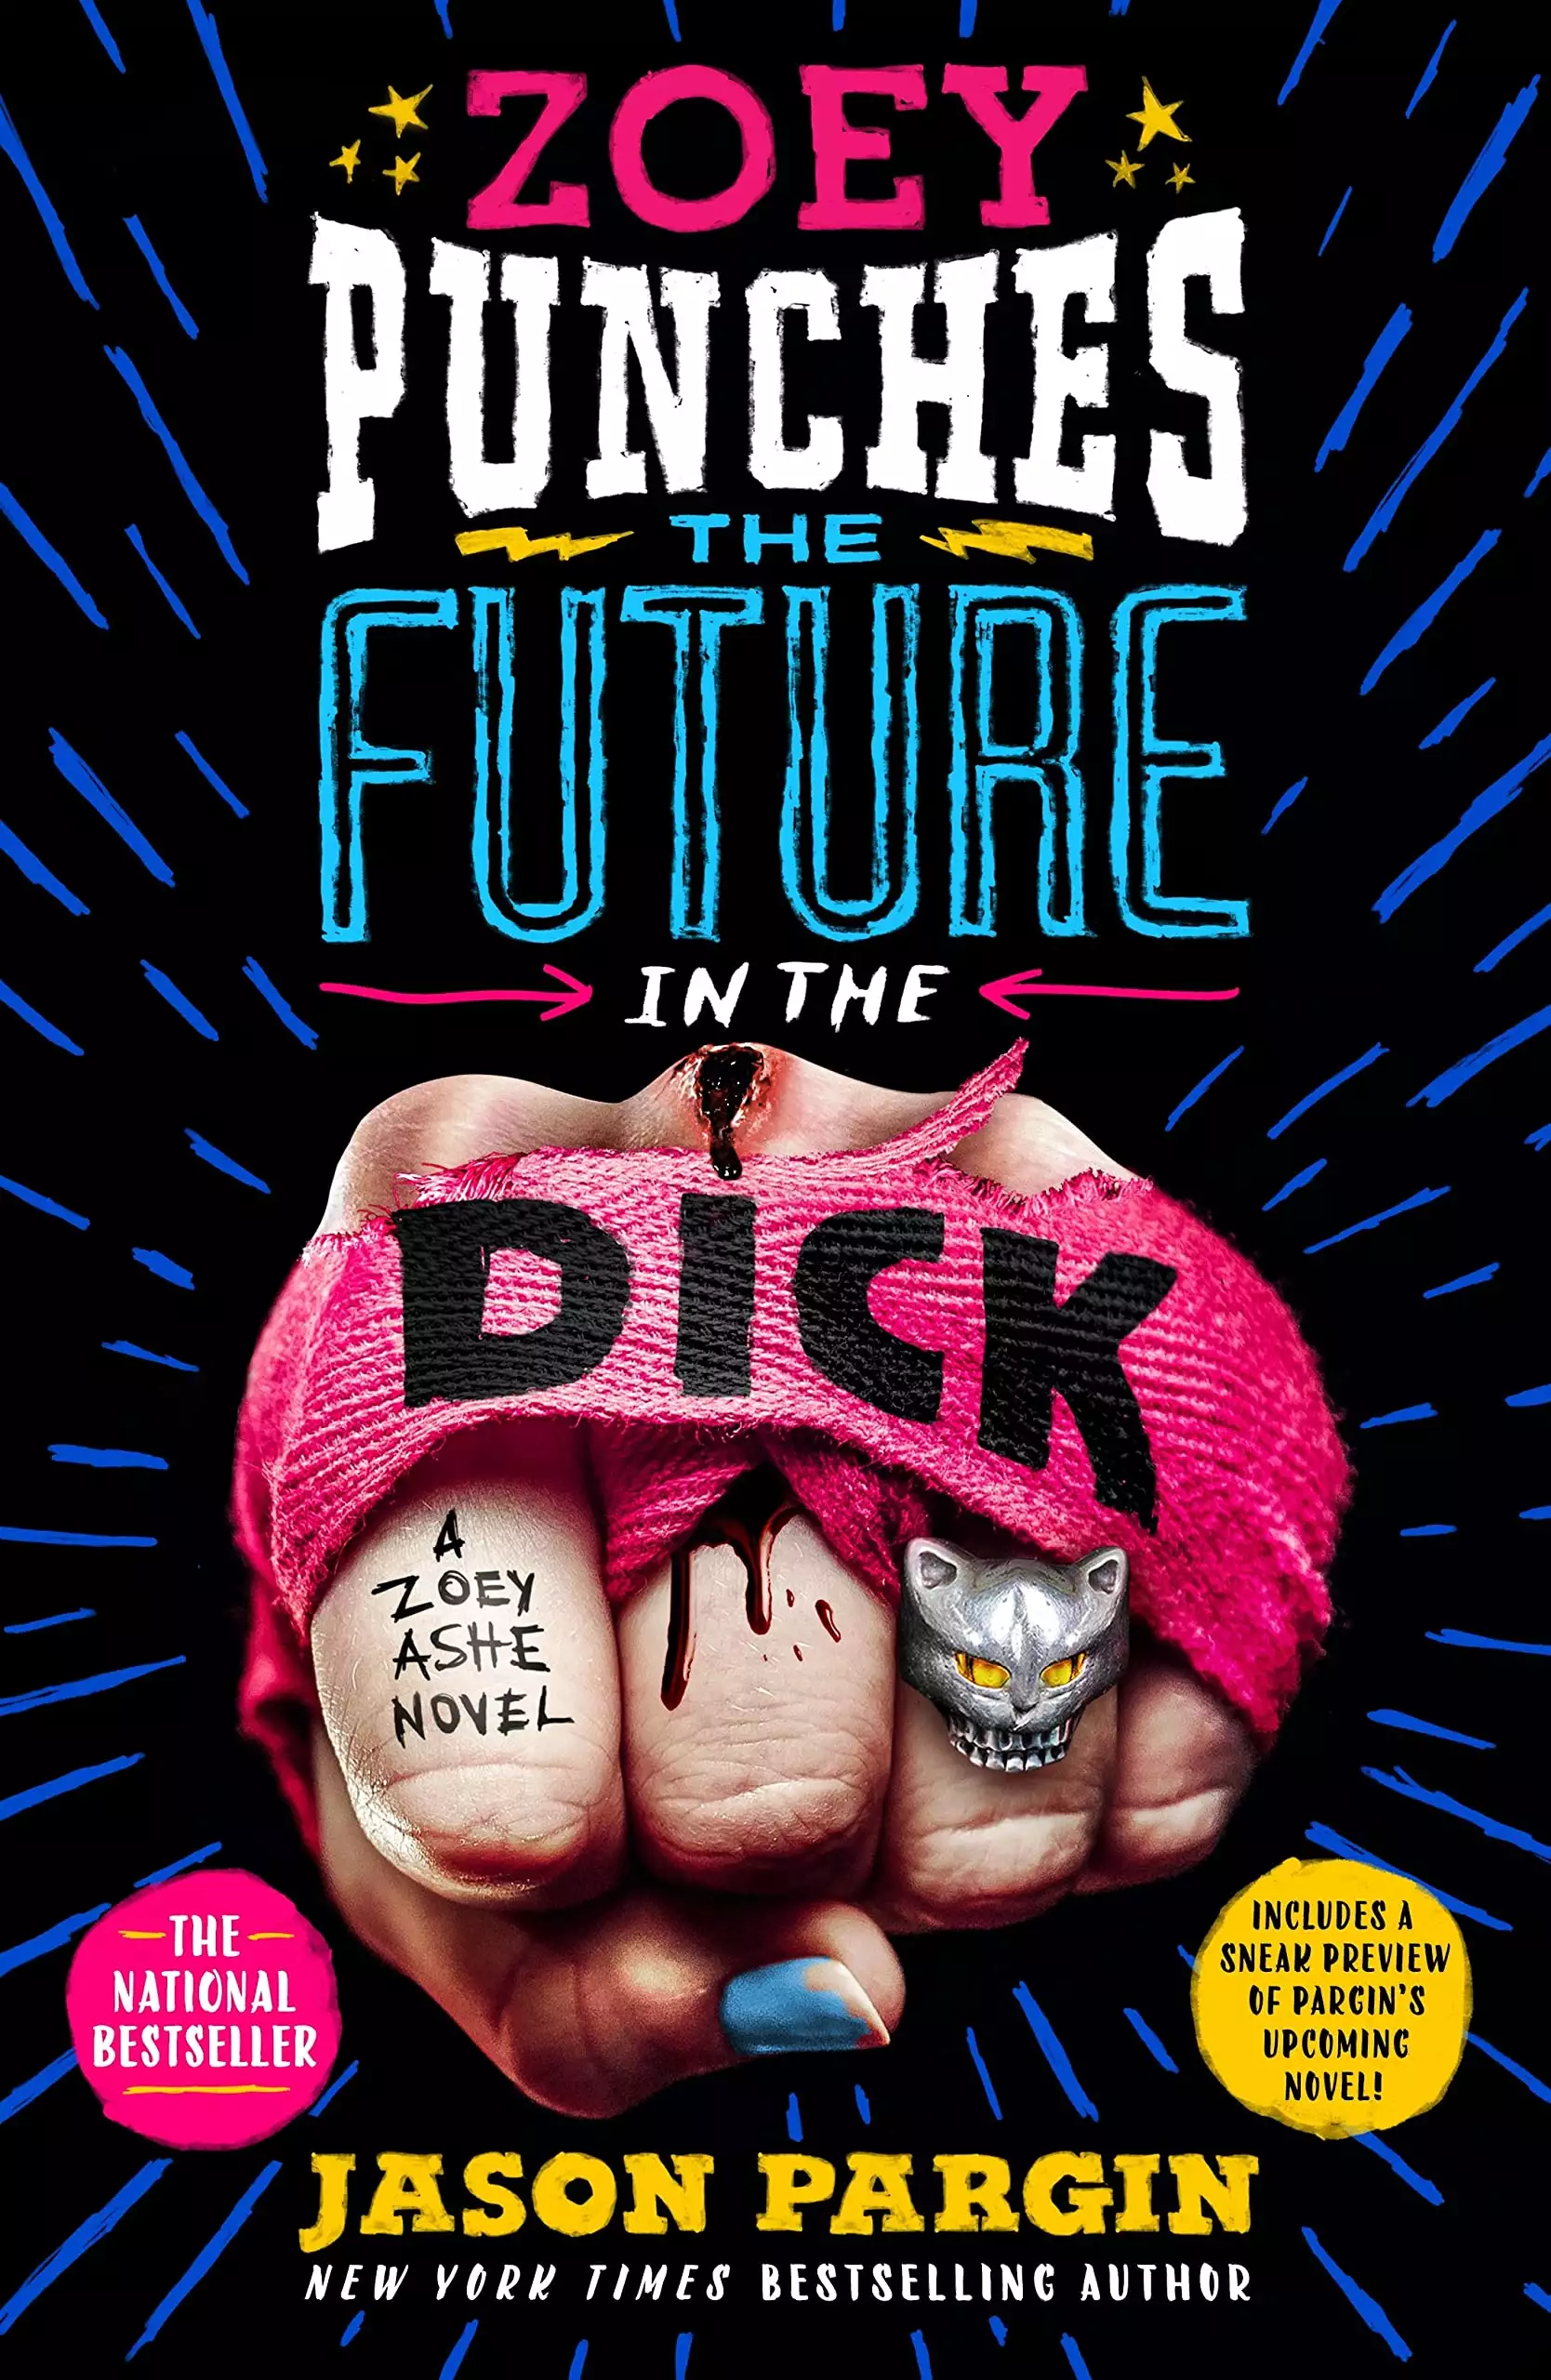 Zoey Punches the Future in the Dick: A Novel